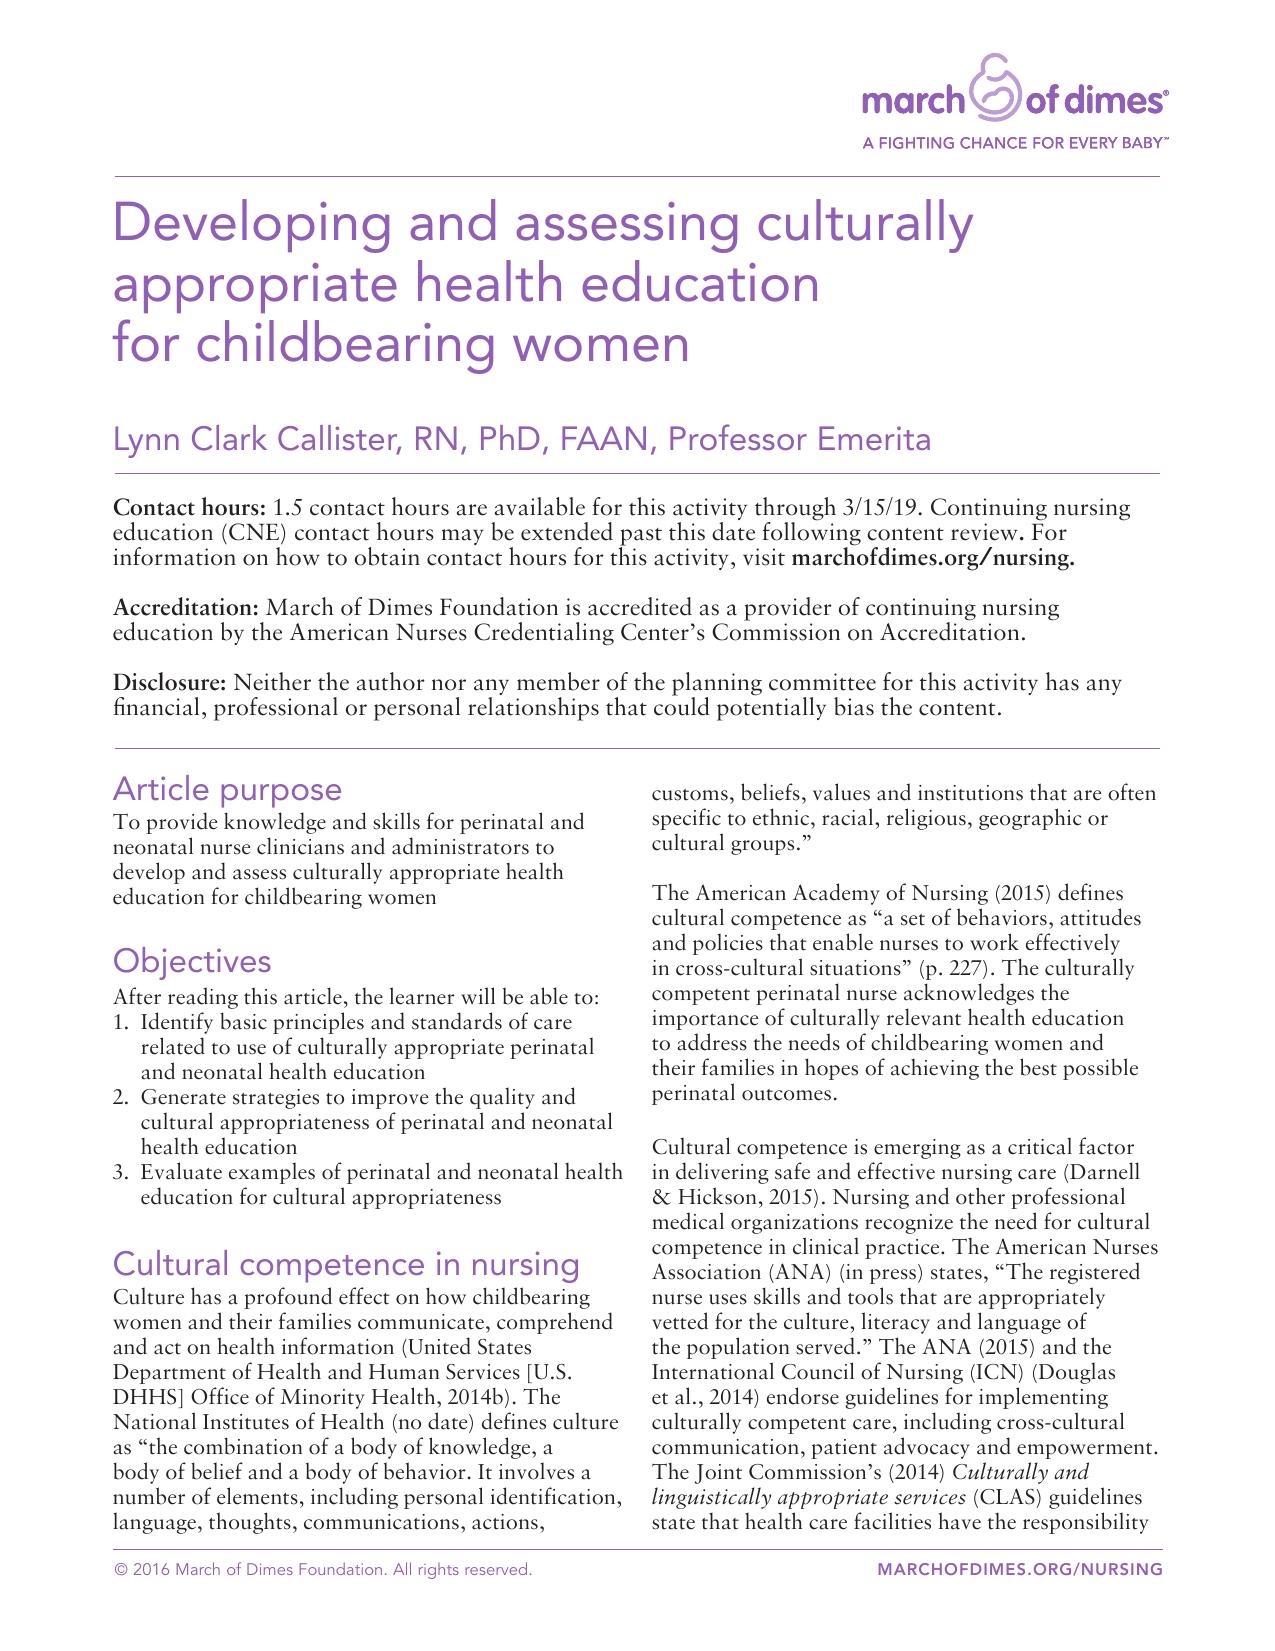 Developing and assessing culturally appropraite health education for childbearing women